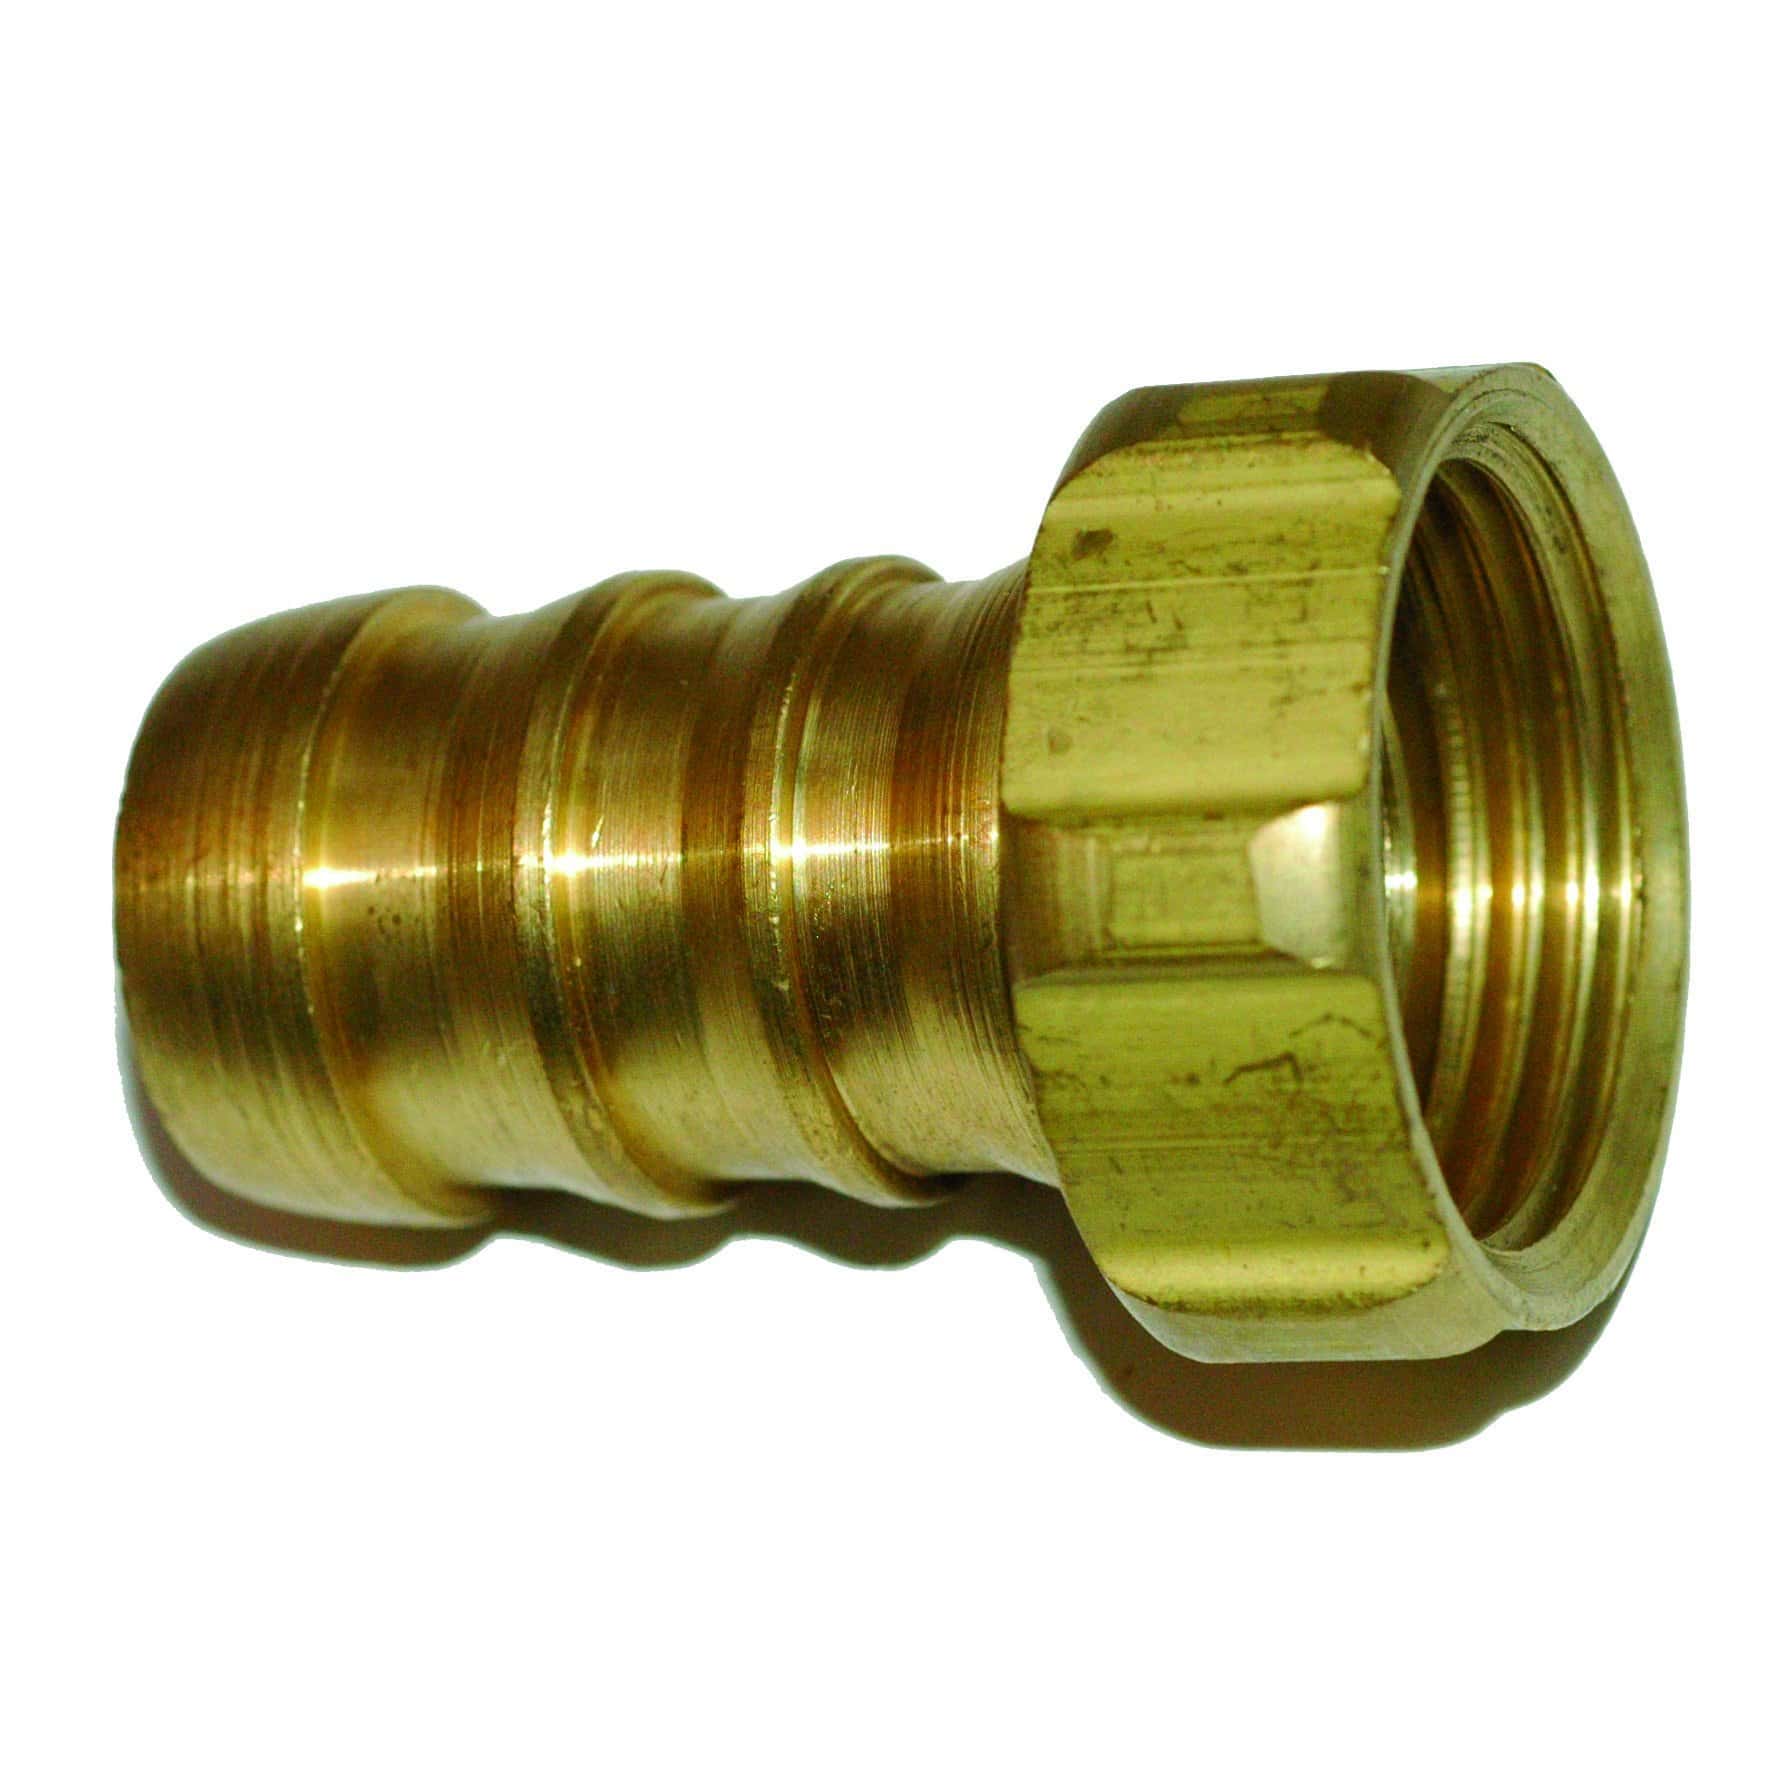 Brass crox nut and tail fitting